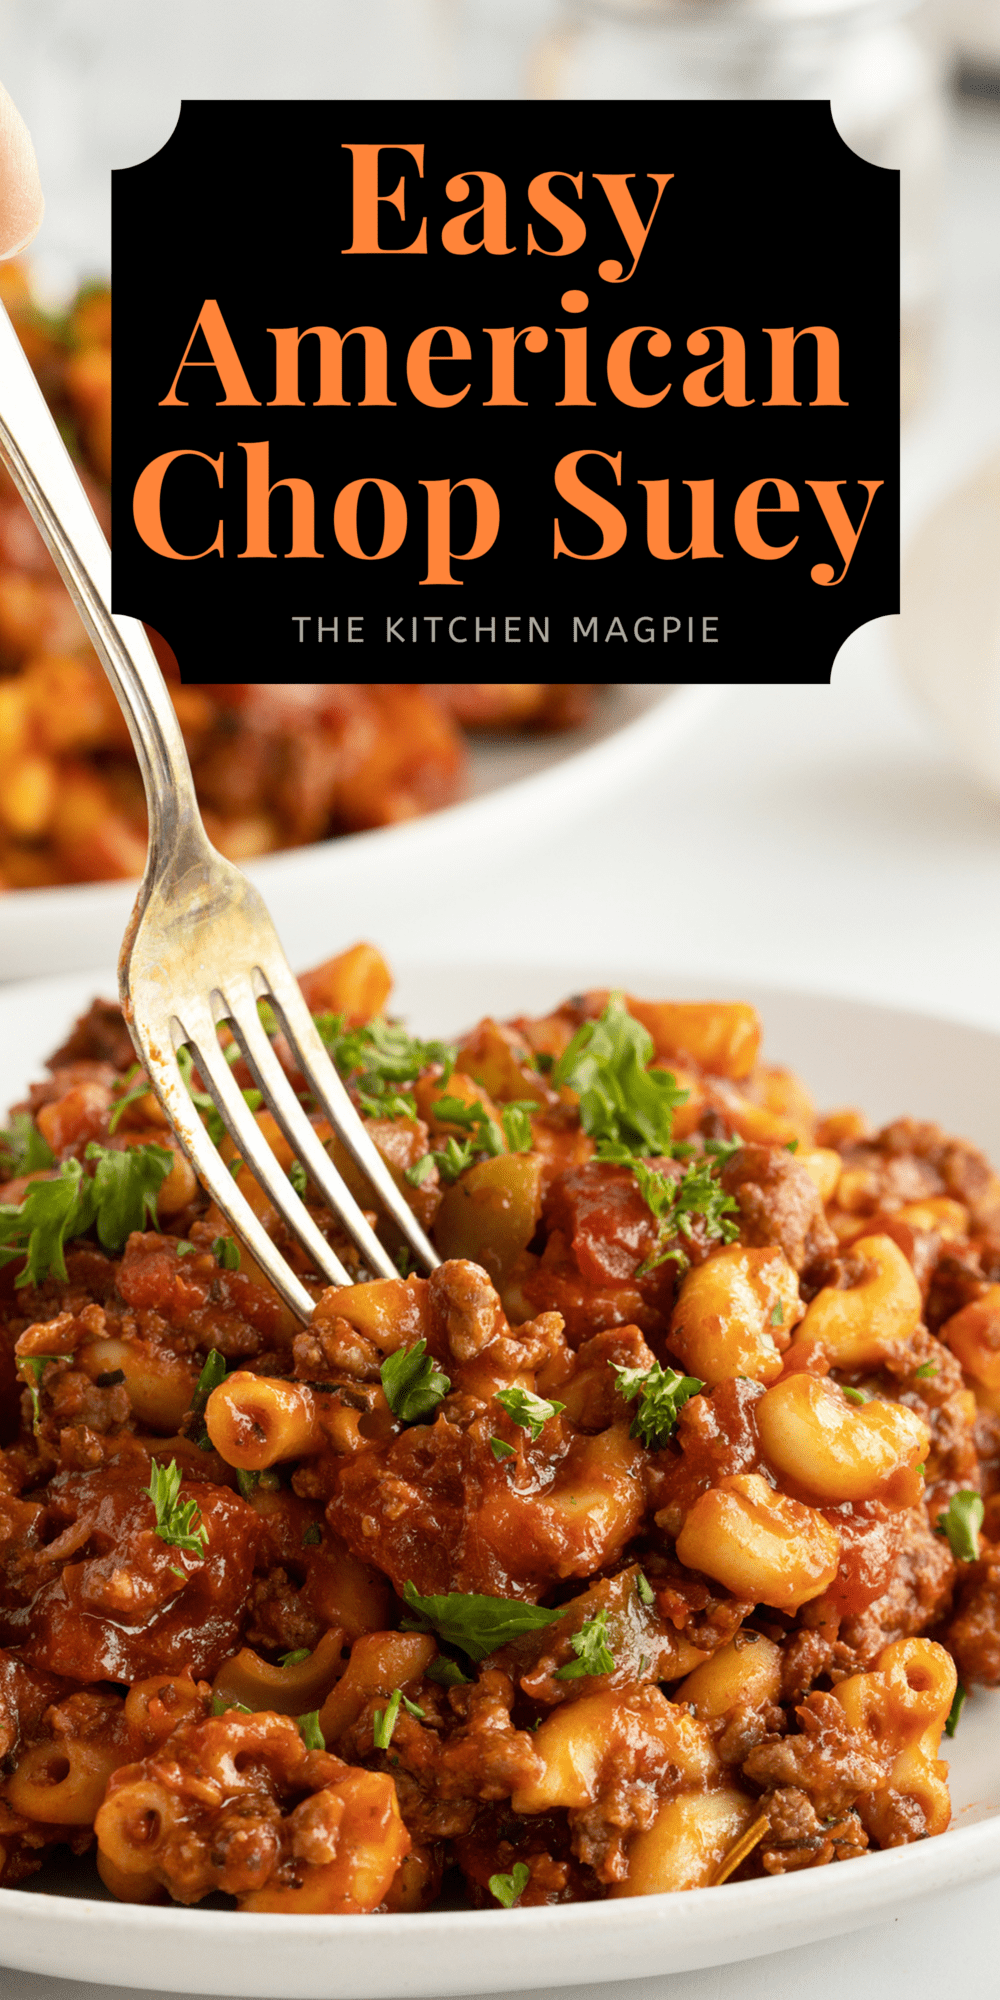 American Chop Suey is a meat and macaroni casserole, this dish is filling, hearty, and stretches really well to fill the whole family on very little.